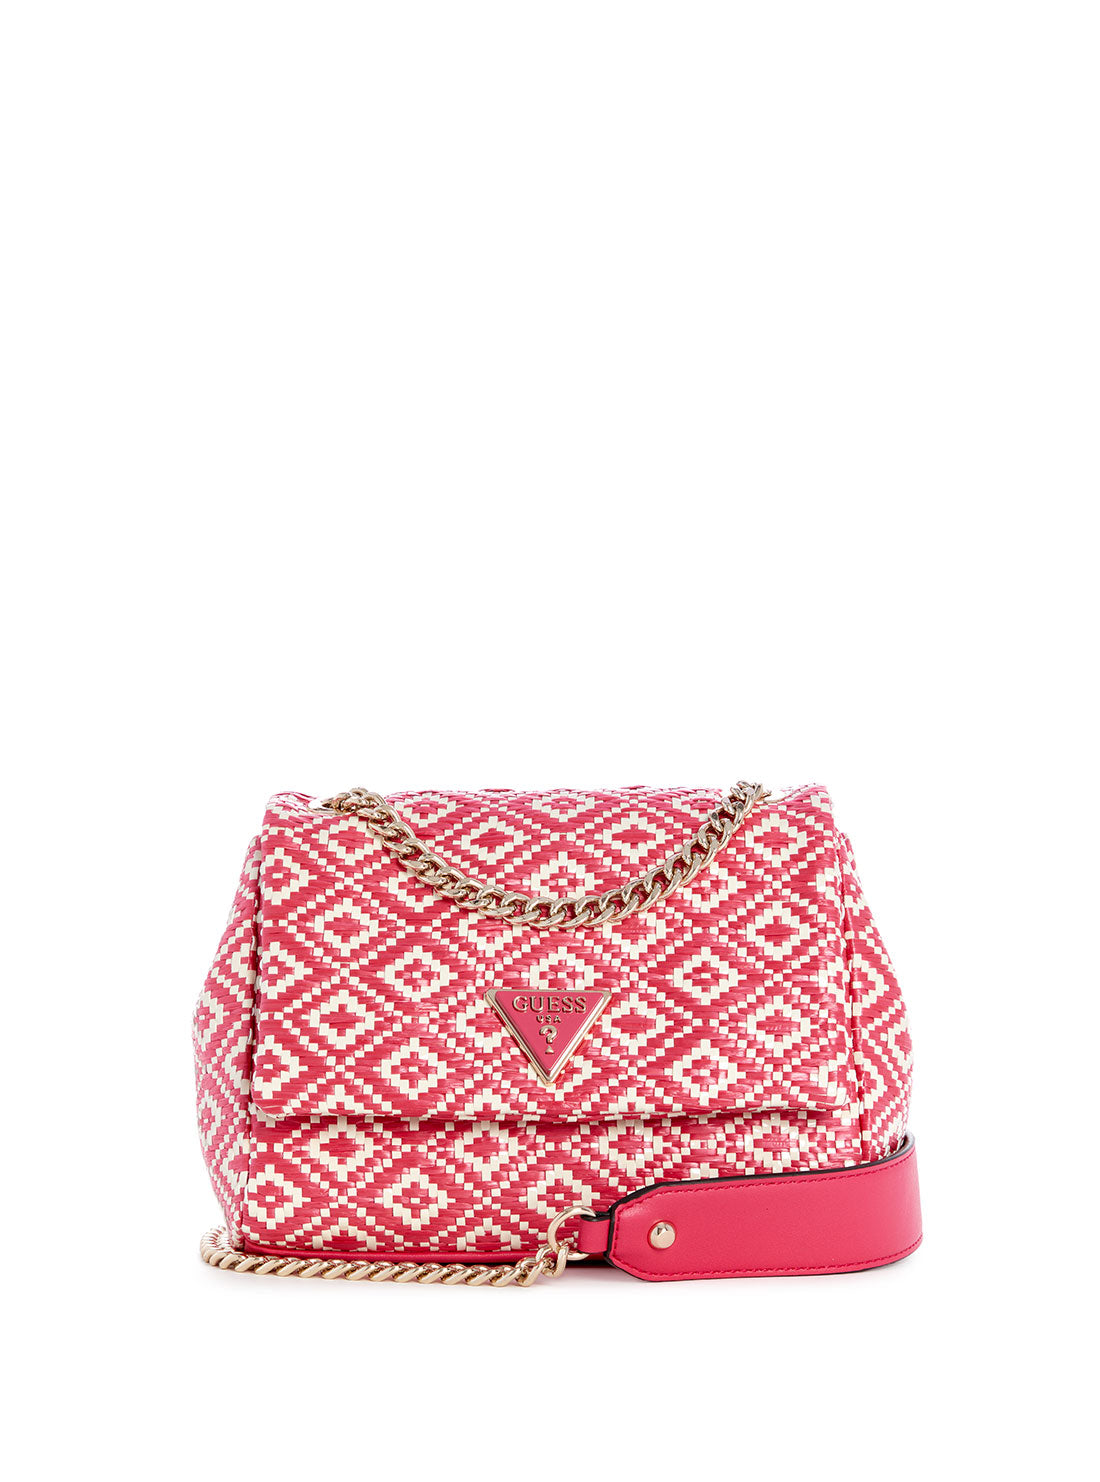 GUESS Pink Rianee Crossbody Flap Bag front view